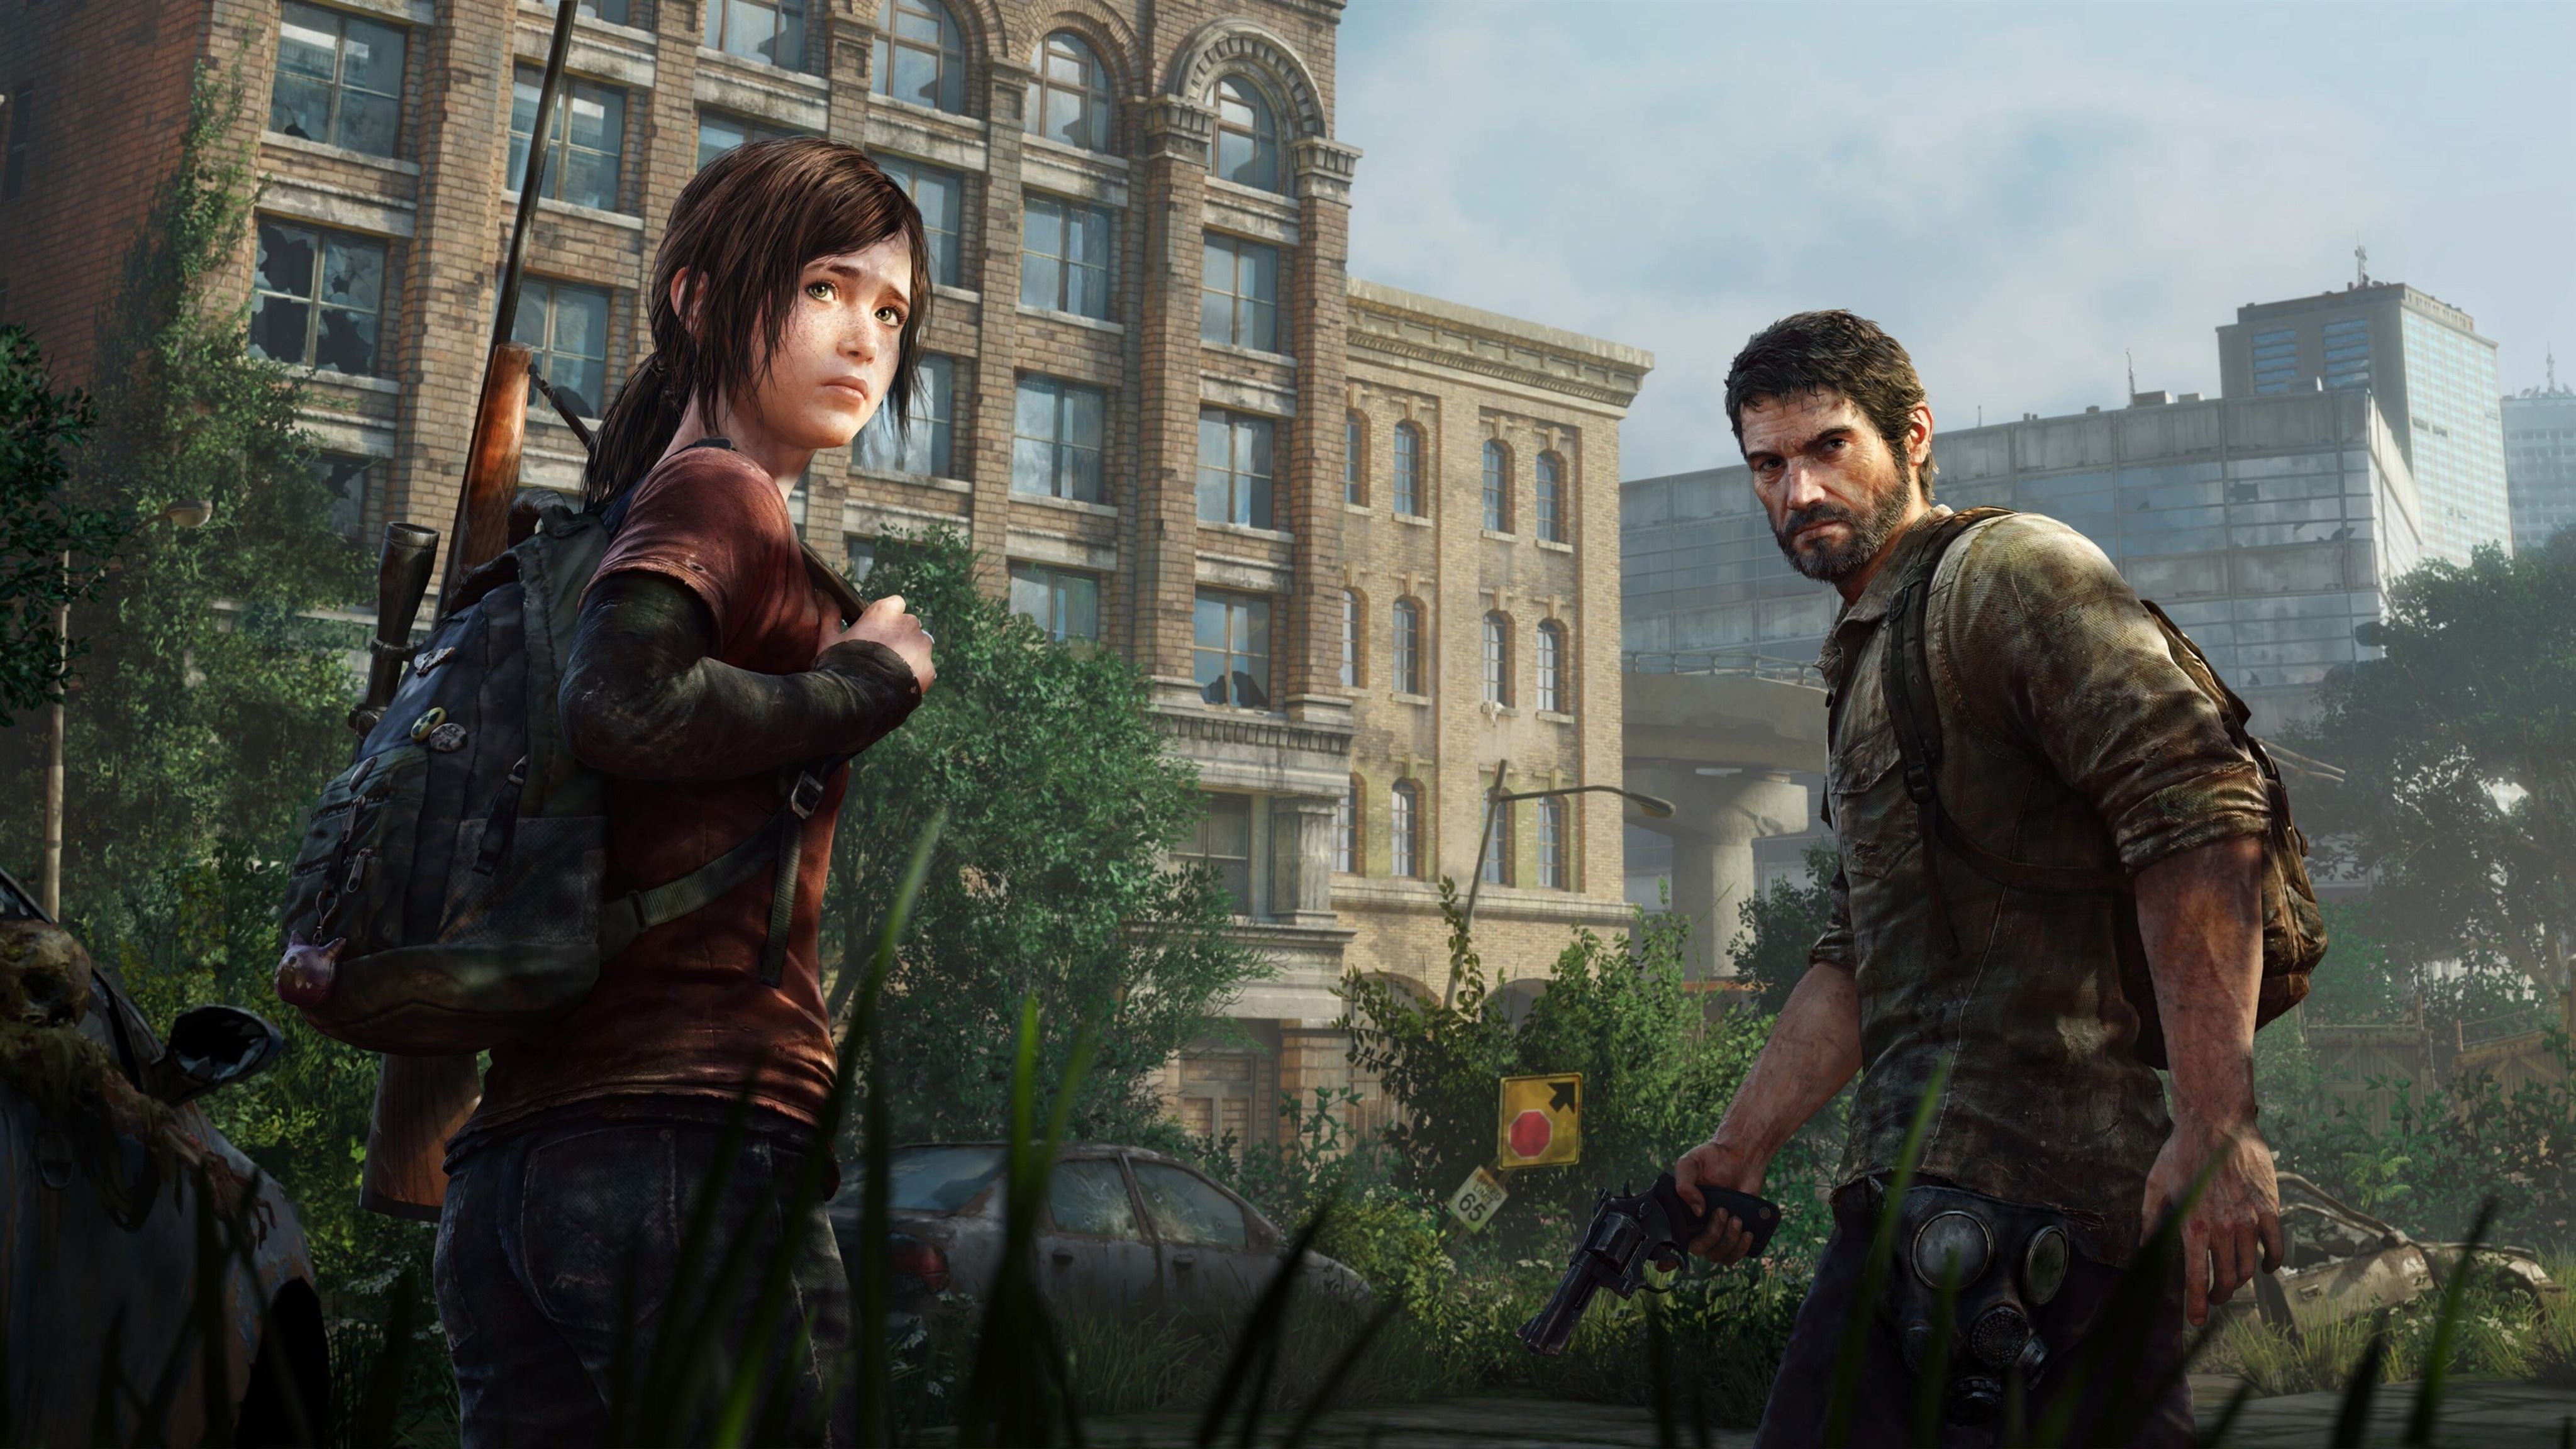 Wallpaper The Last of Us The Last of Us Part II Ellie Joel Naughty Dog  Background  Download Free Image